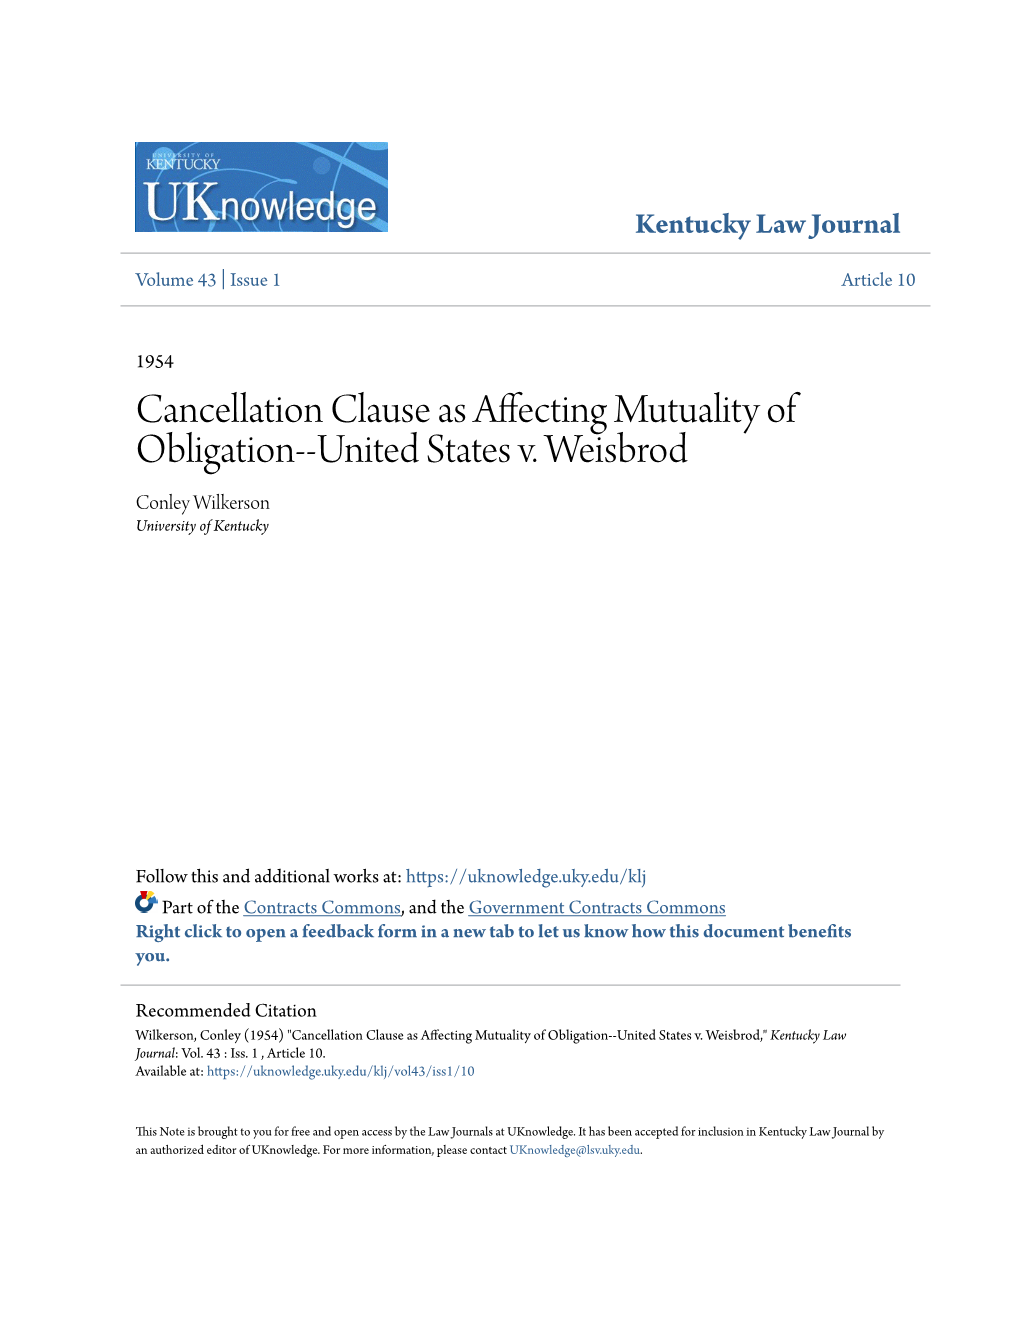 Cancellation Clause As Affecting Mutuality of Obligation--United States V